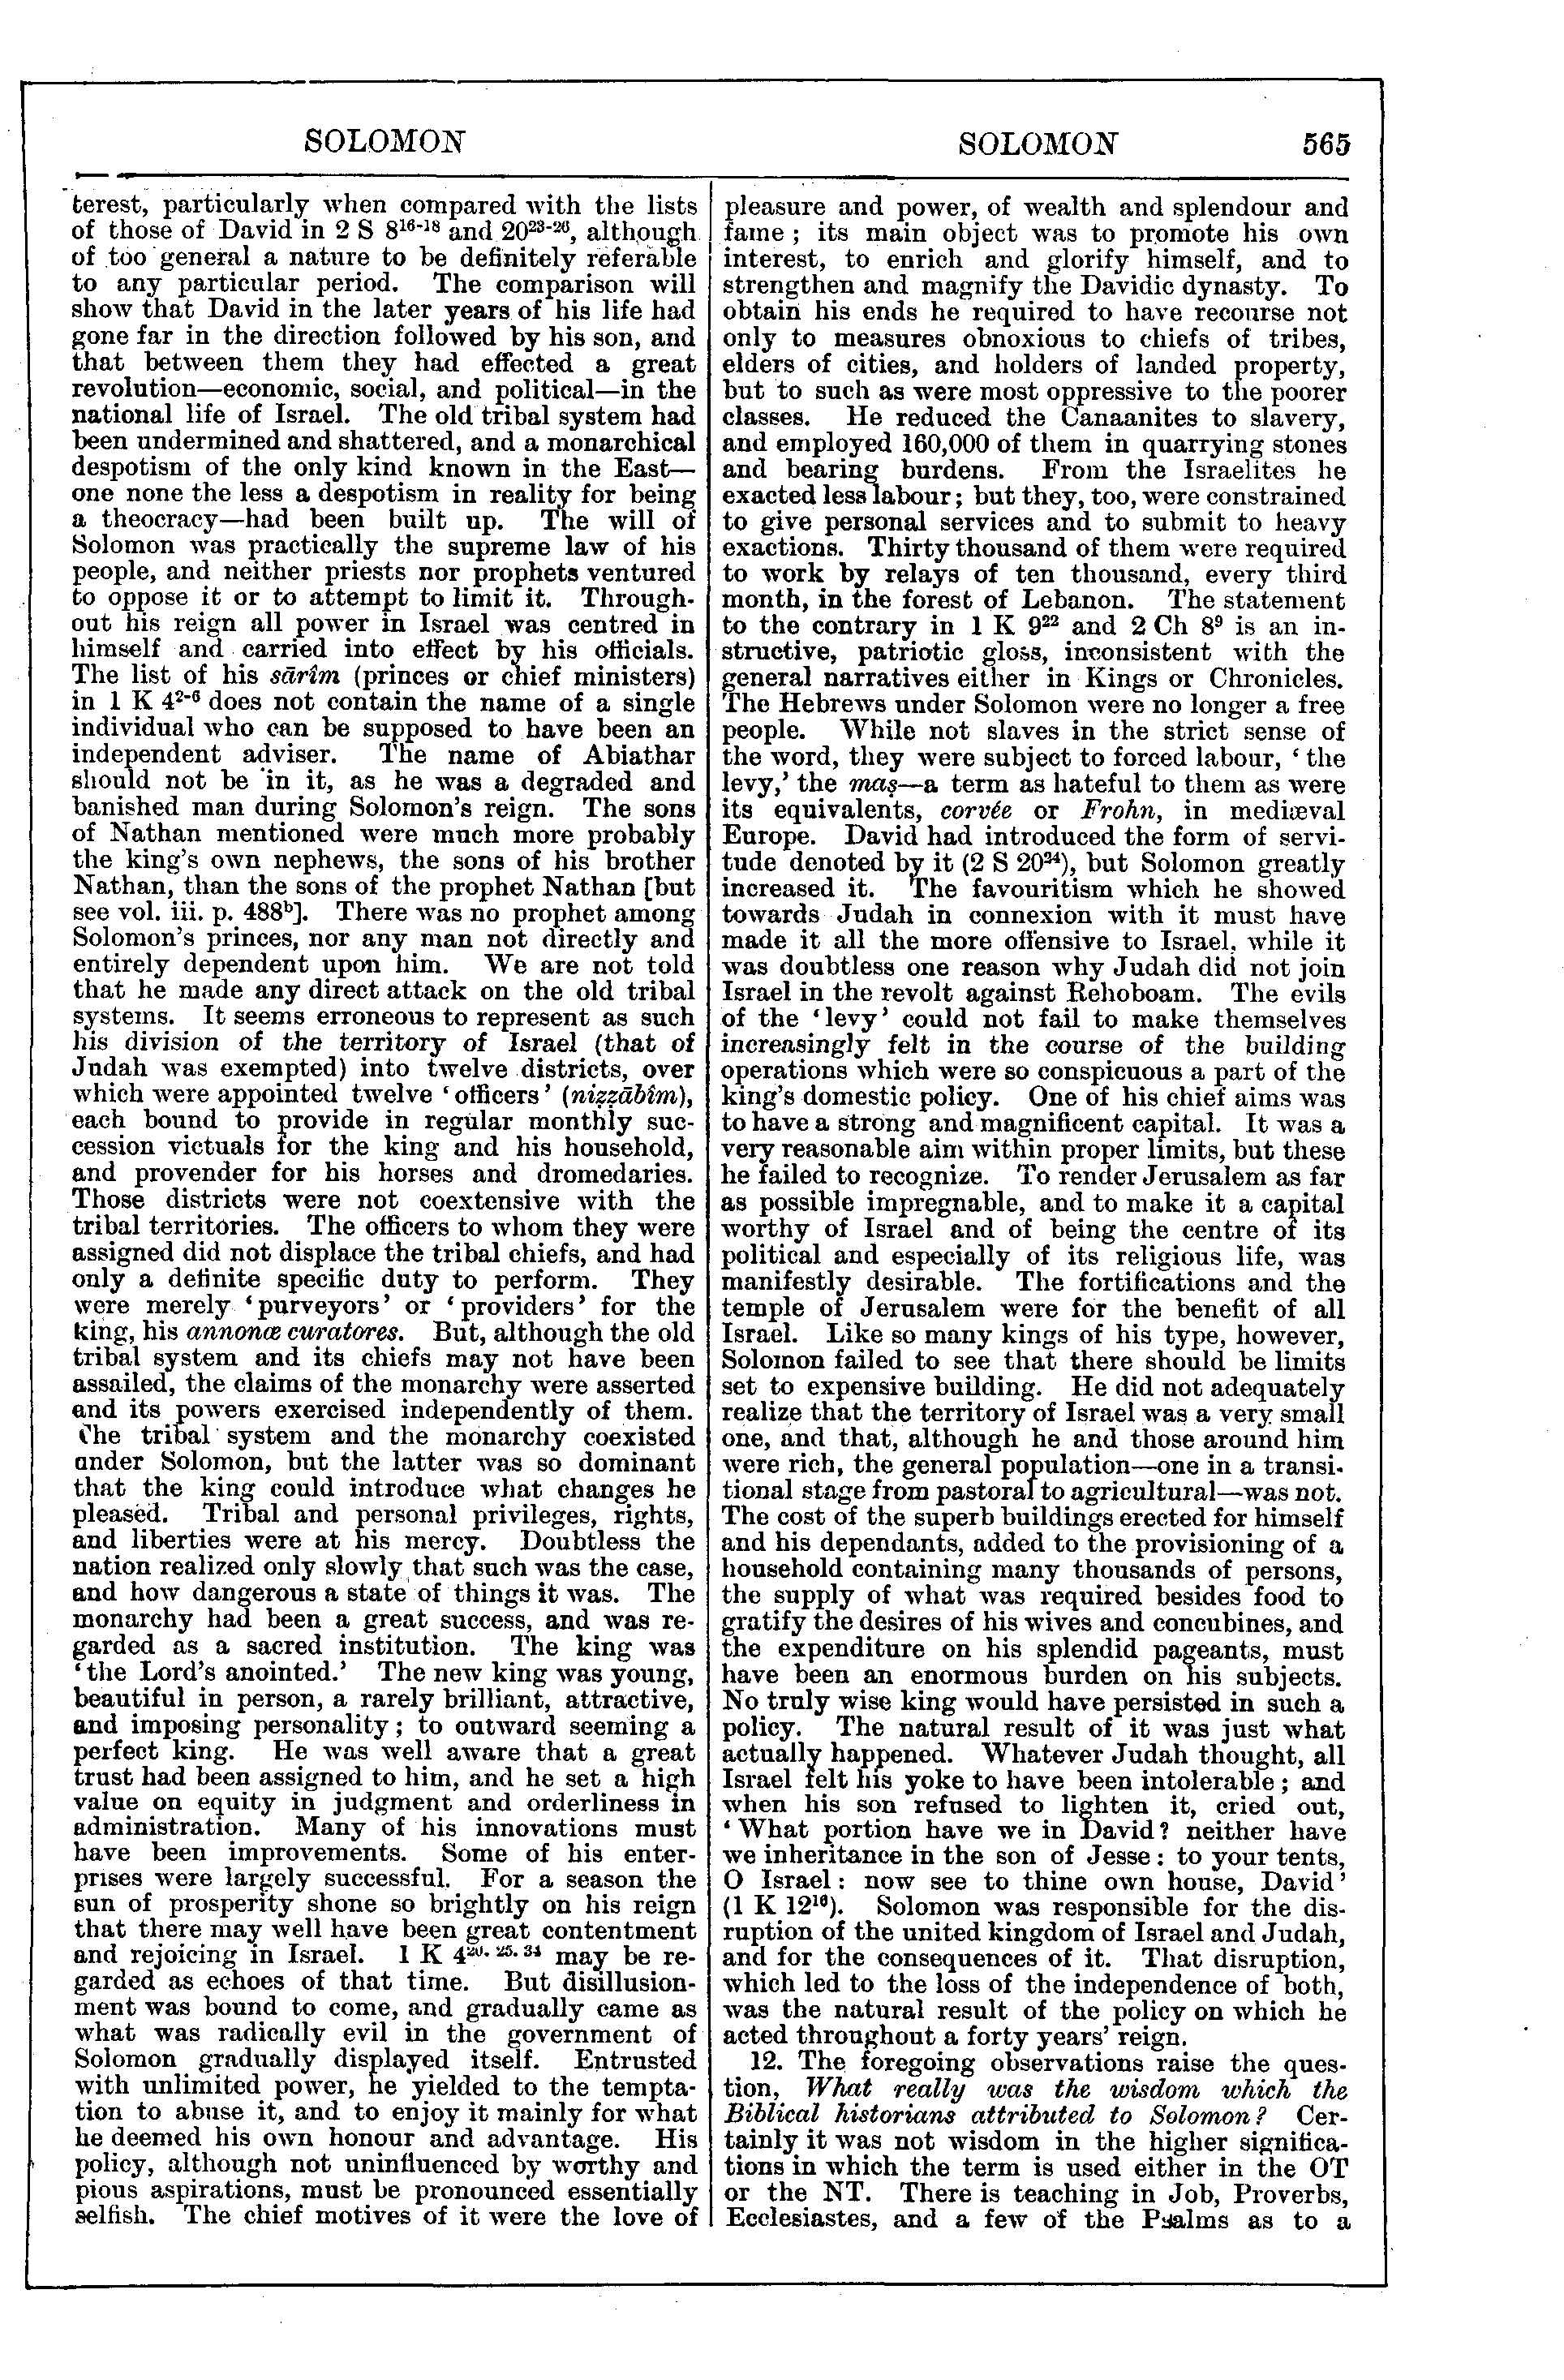 Image of page 565